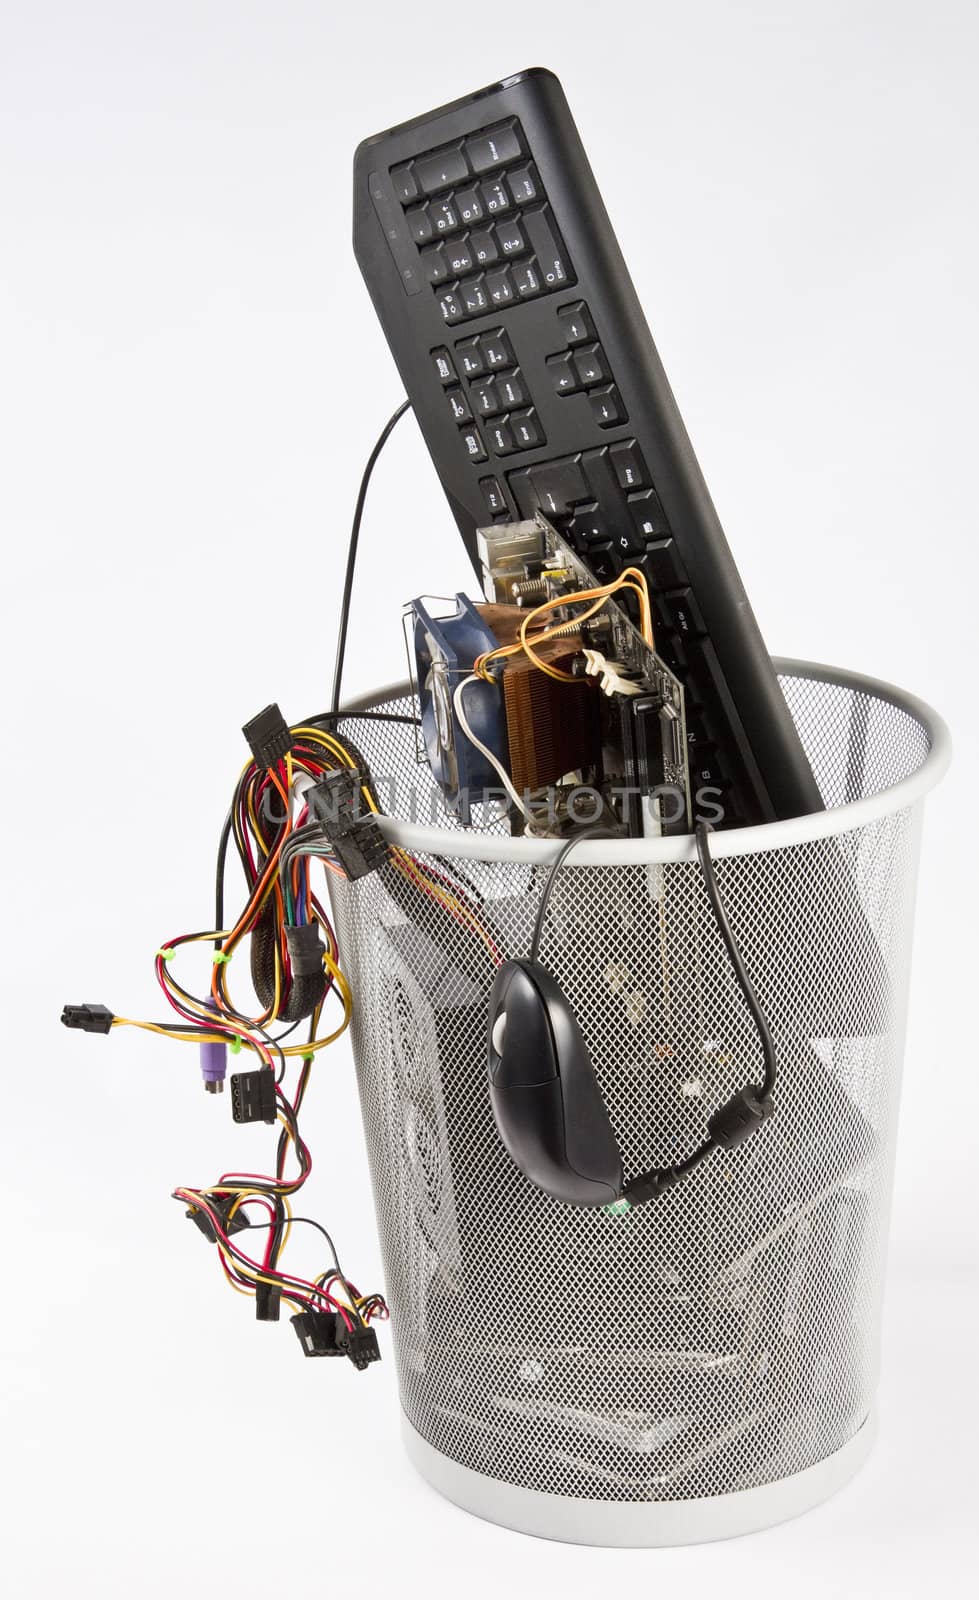 electronic waste in wast basket